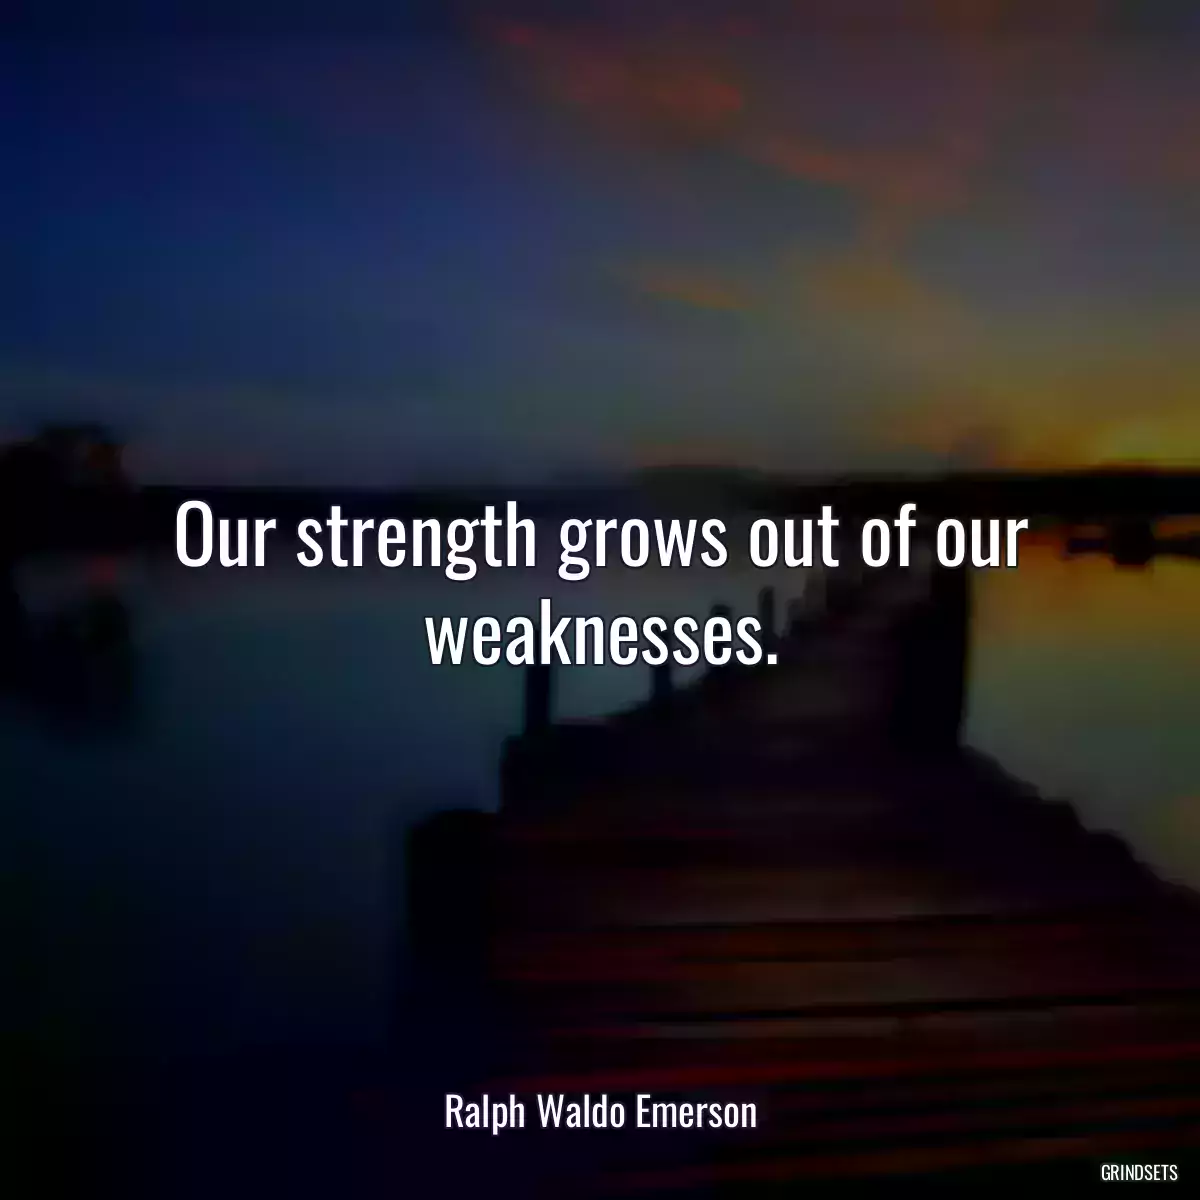 Our strength grows out of our weaknesses.